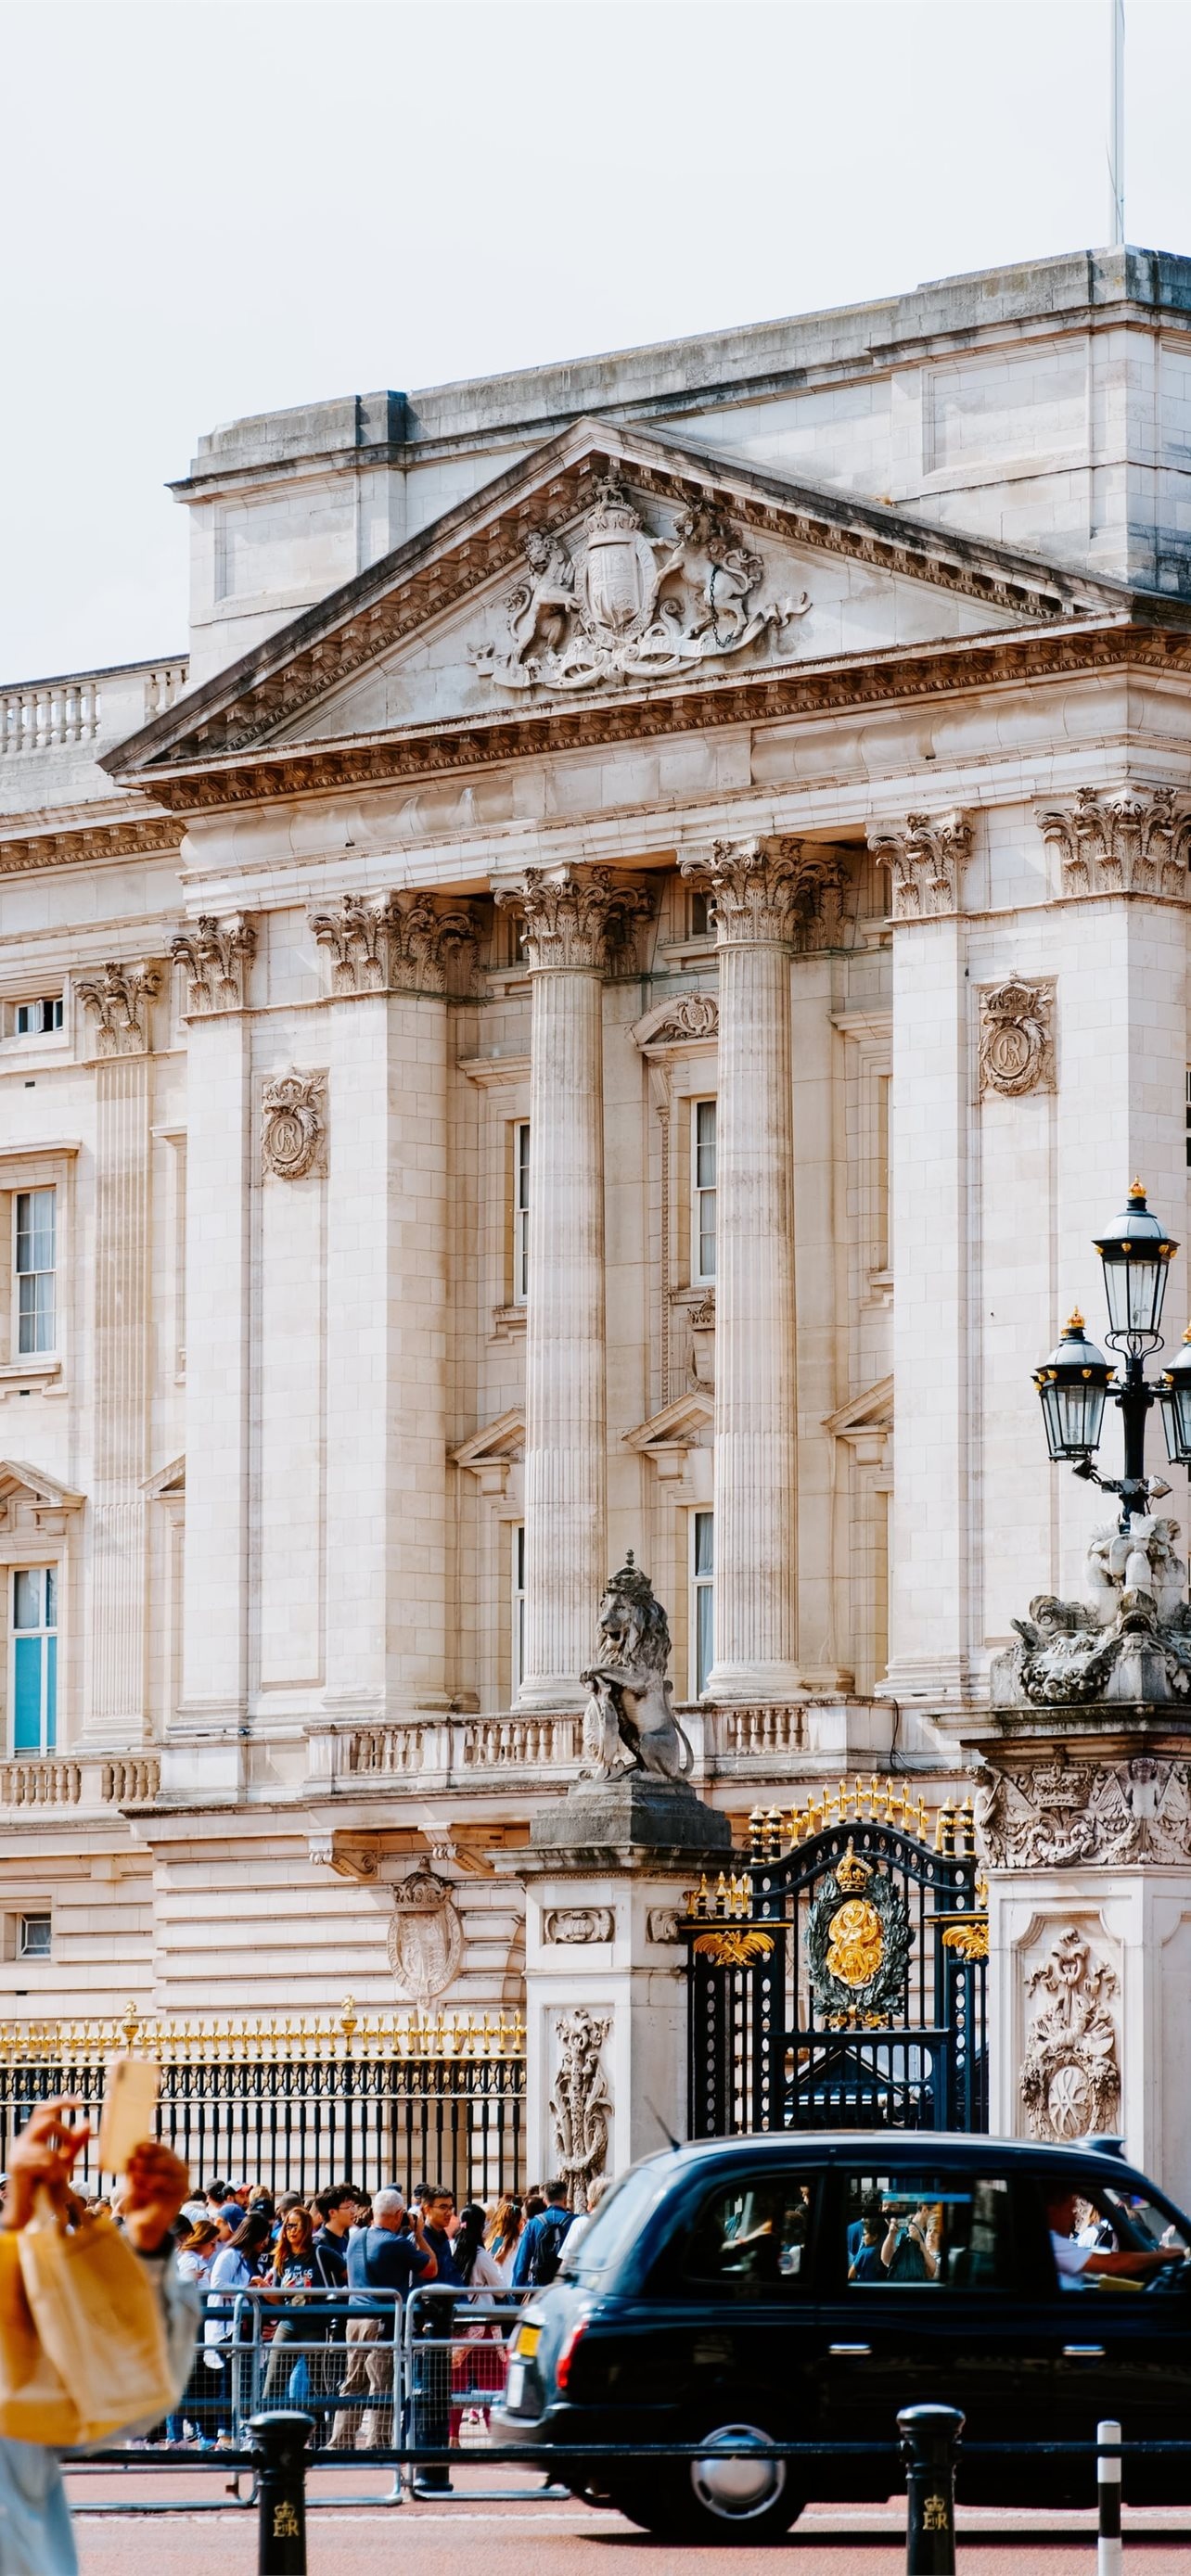 Palace: Buckingham Palace, A London royal residence, Located in the City of Westminster. 1290x2780 HD Wallpaper.